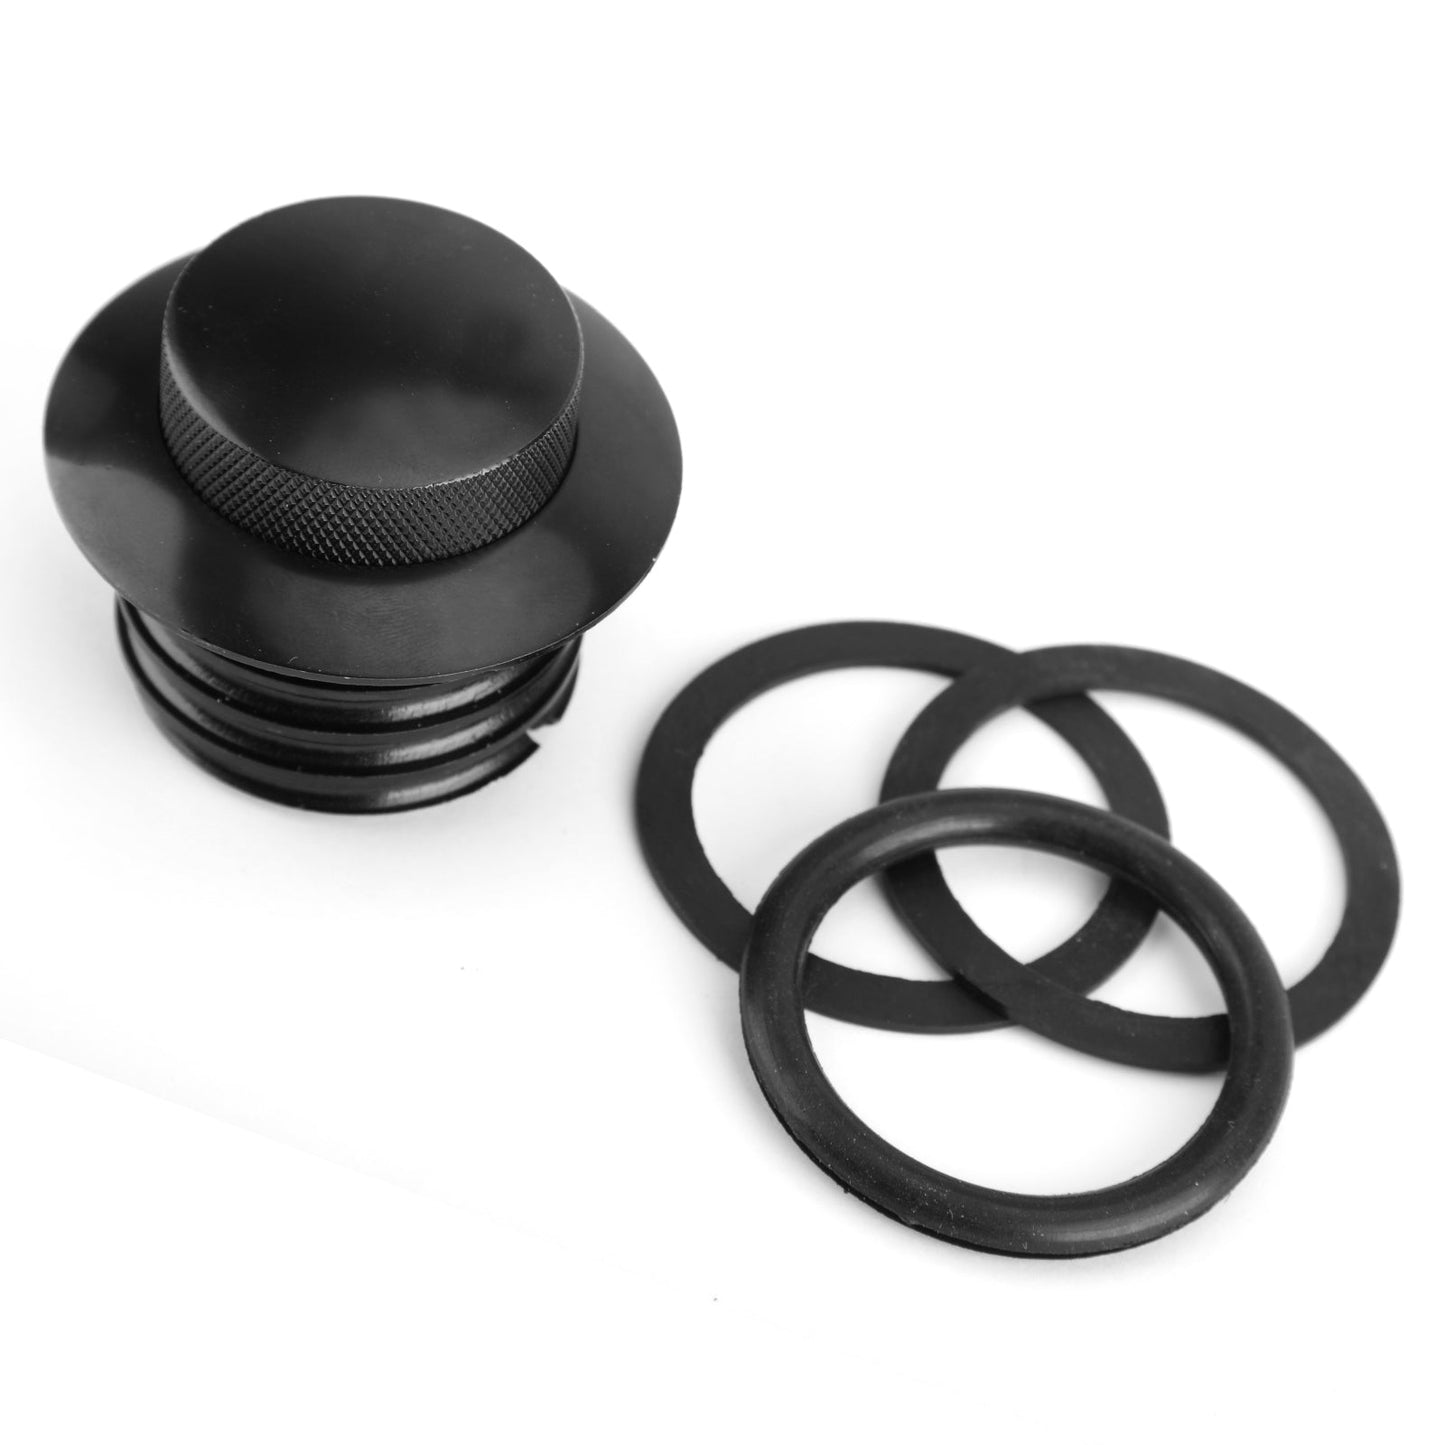 2x Black Flush Pop Up Fuel Gas Cap Fit for Sportster Softail Dyna 82-10